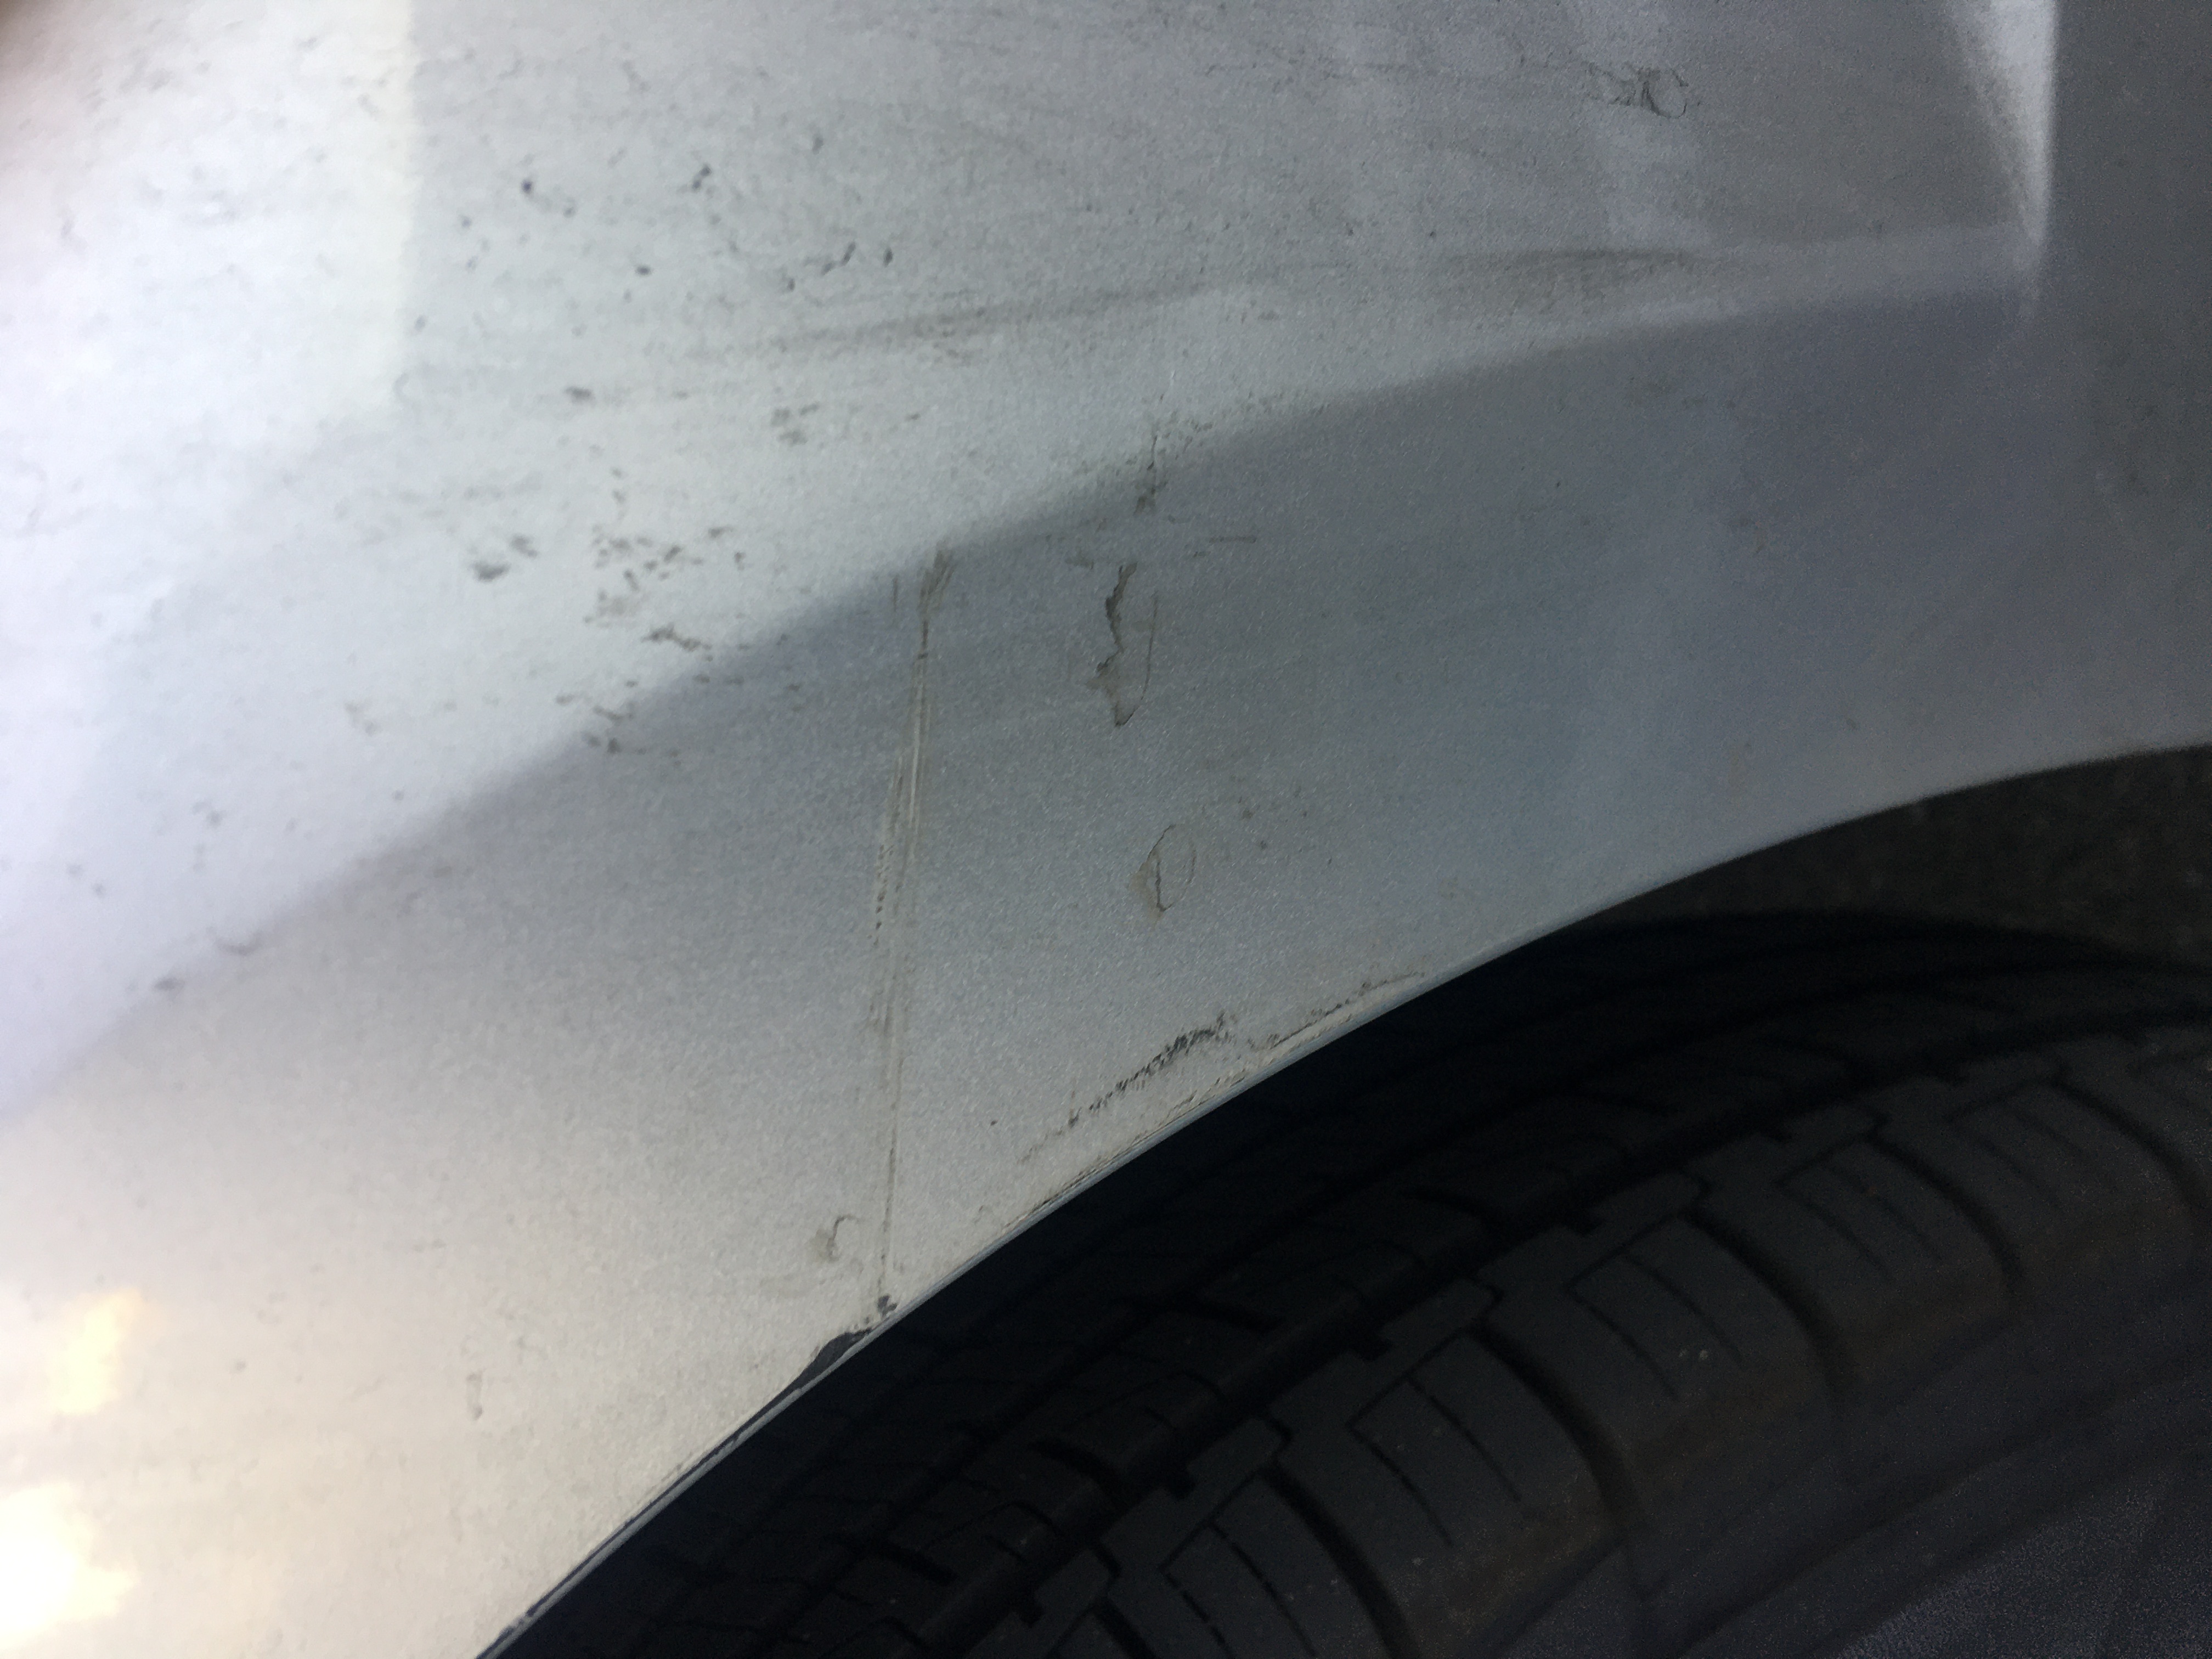 This tiny scratch caused $3,600 in damage?